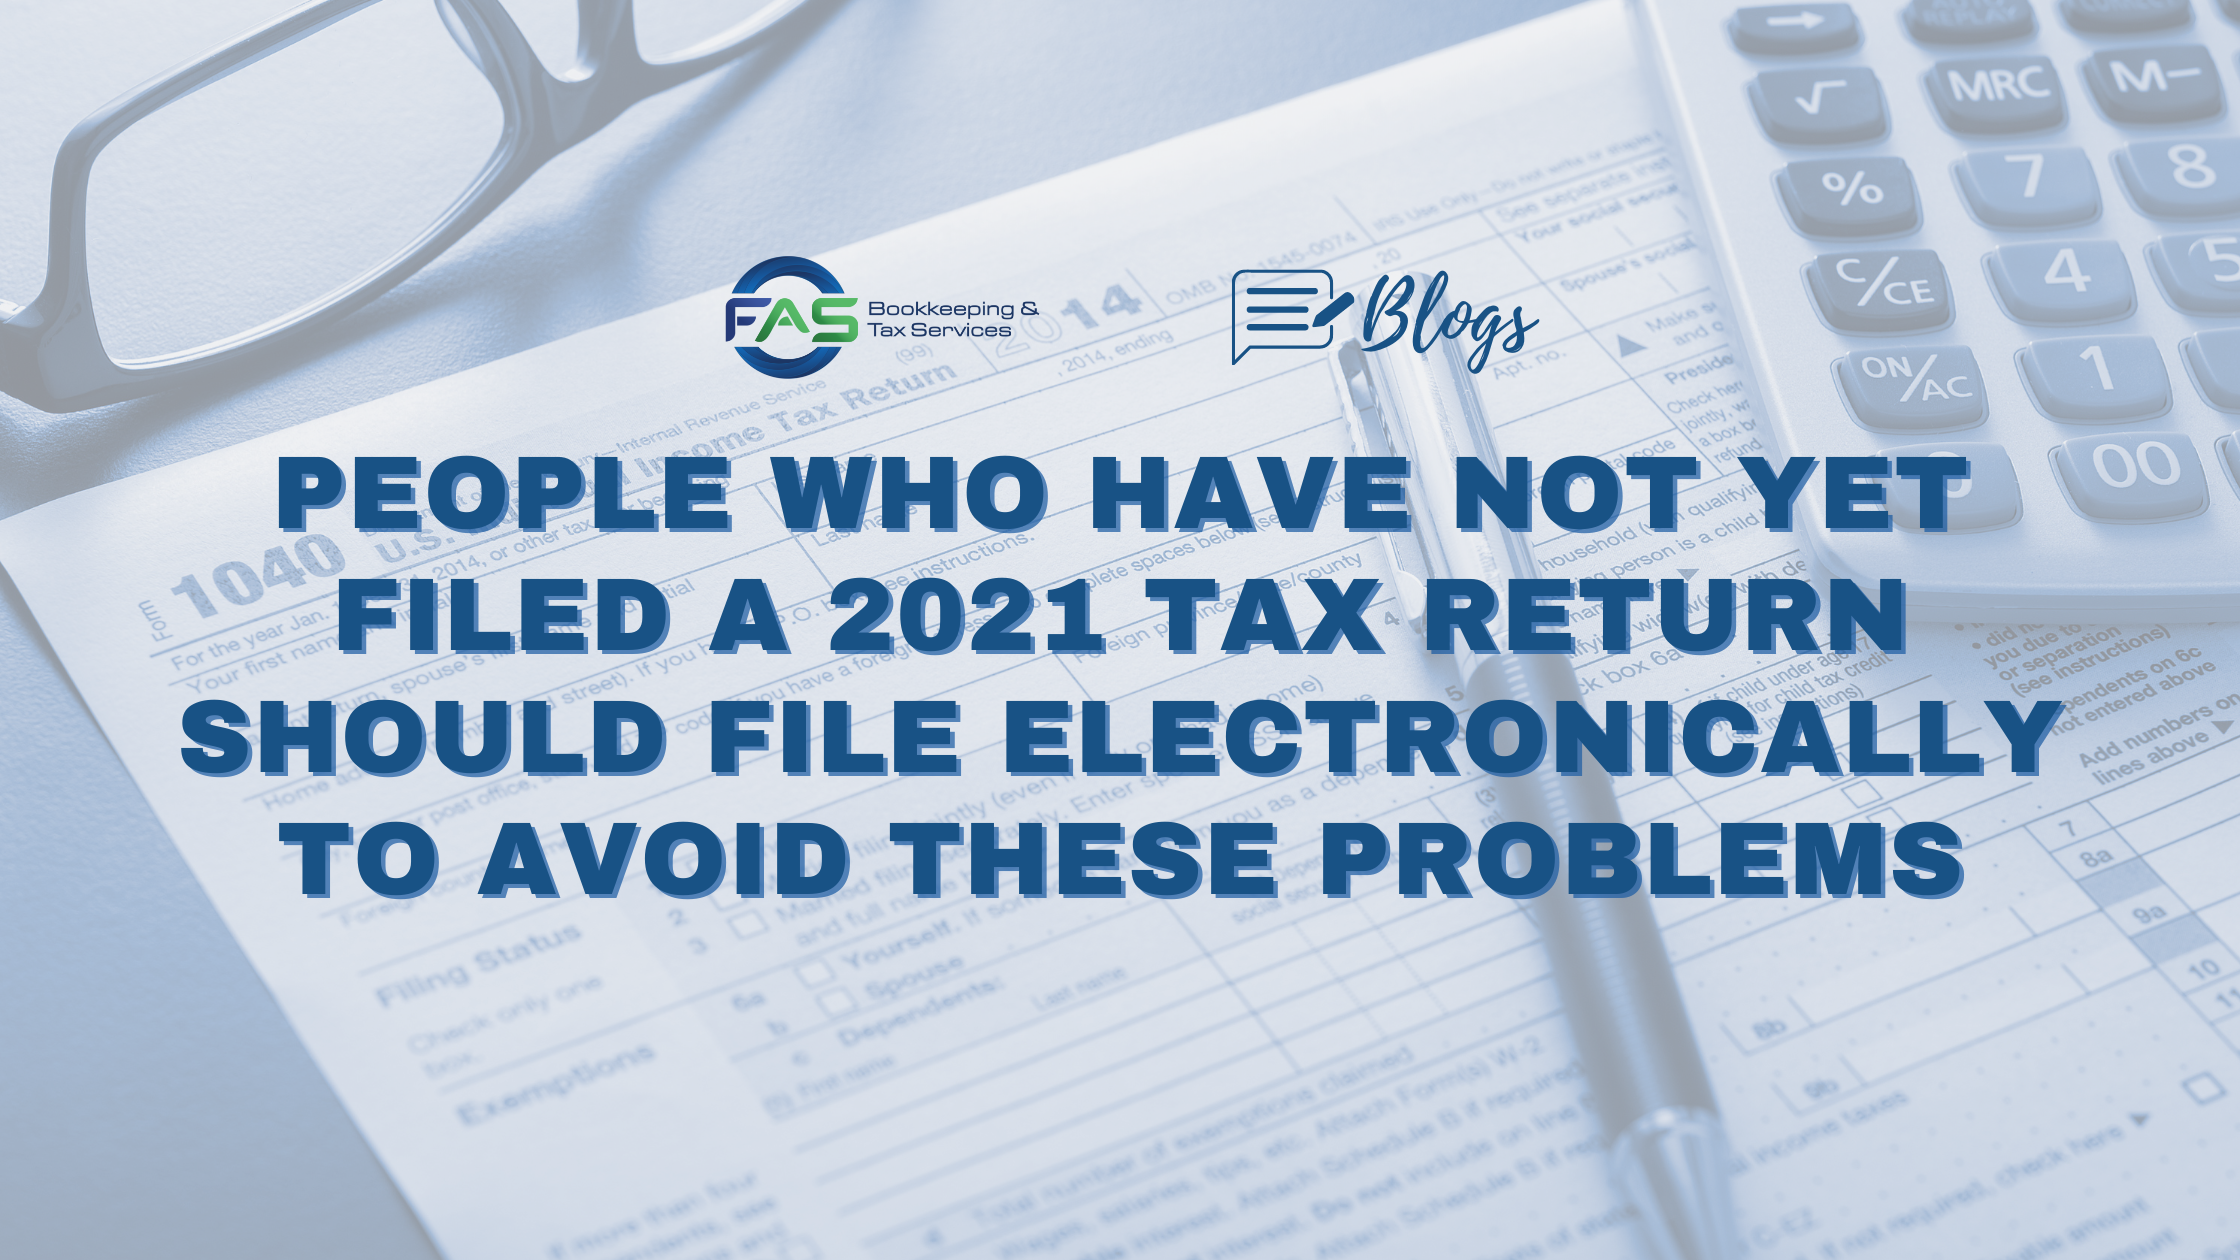 People Who Have Not Yet Filed A 2021 Tax Return Should File Electronically to Avoid These Problems